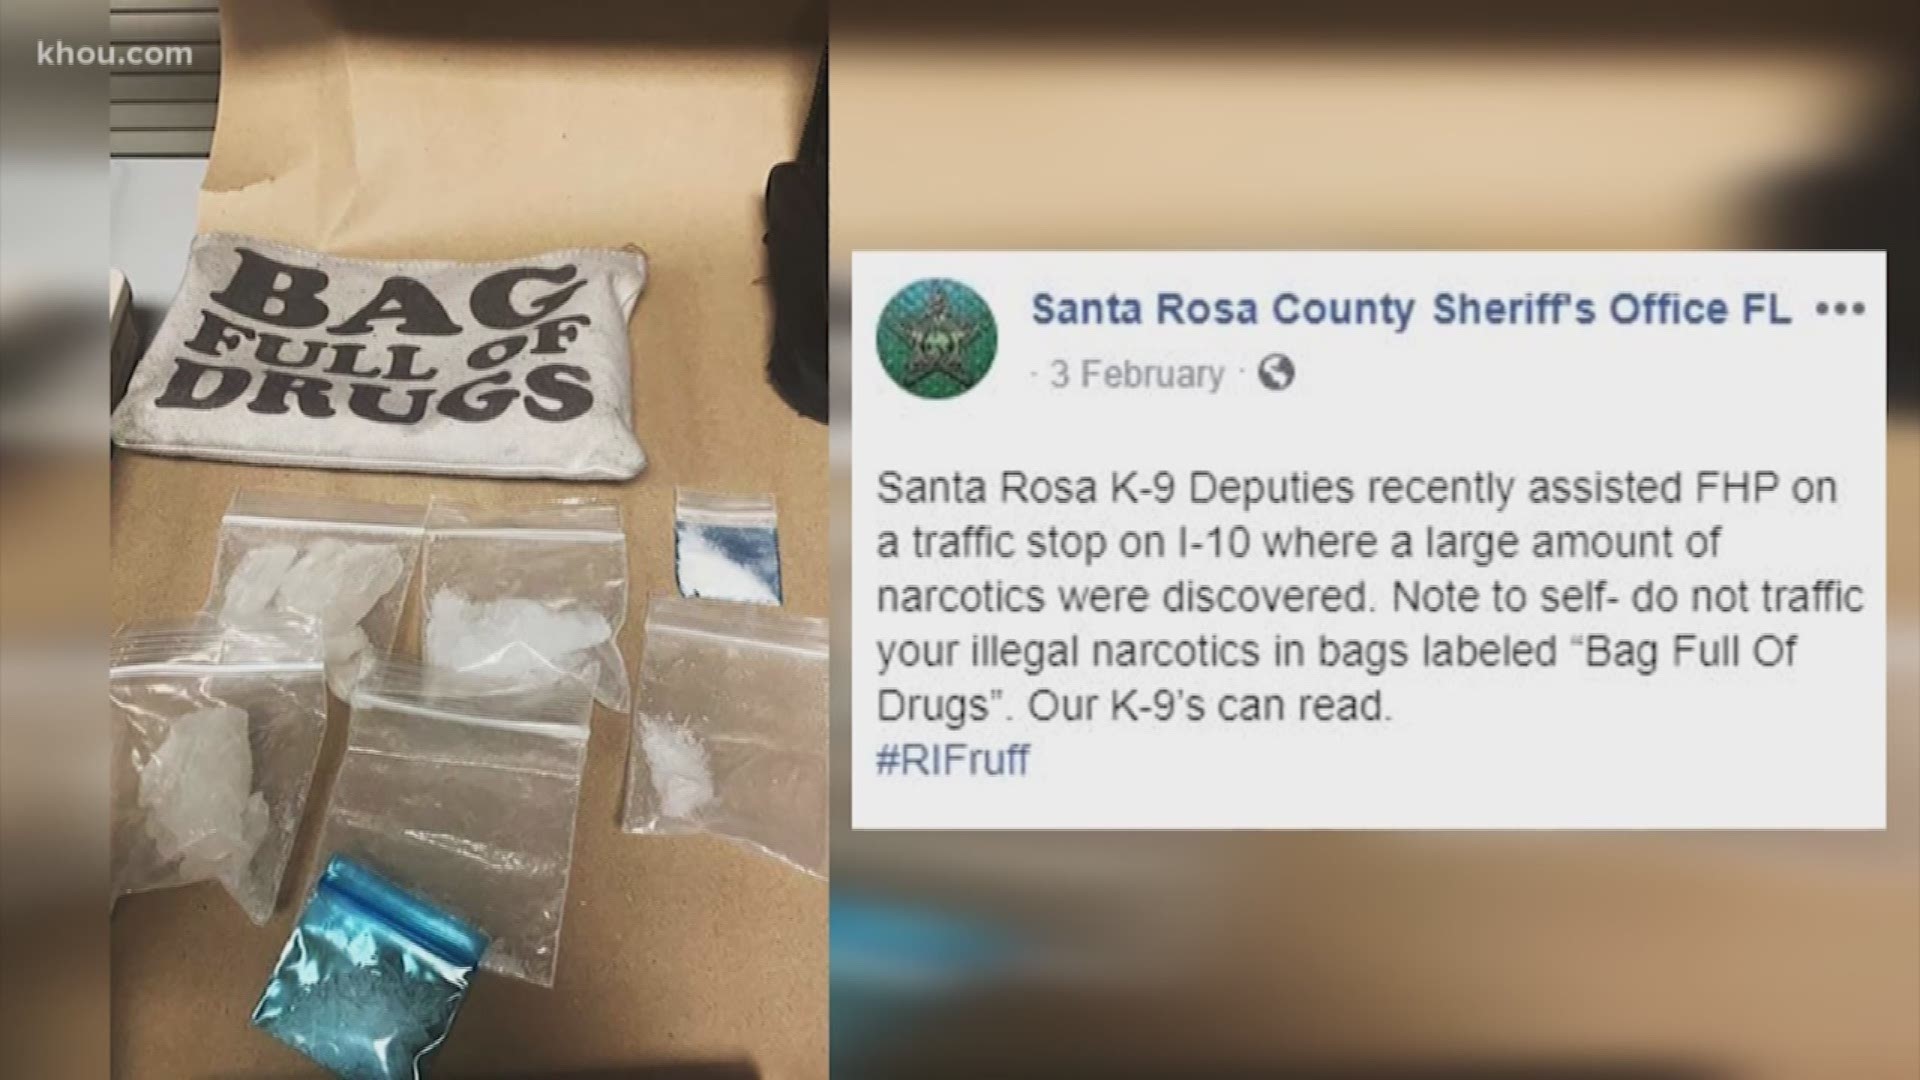 A couple of guys who were pulled over for speeding were arrested after K9 officers alerted deputies to drugs inside bags labeled "bag full of drugs."